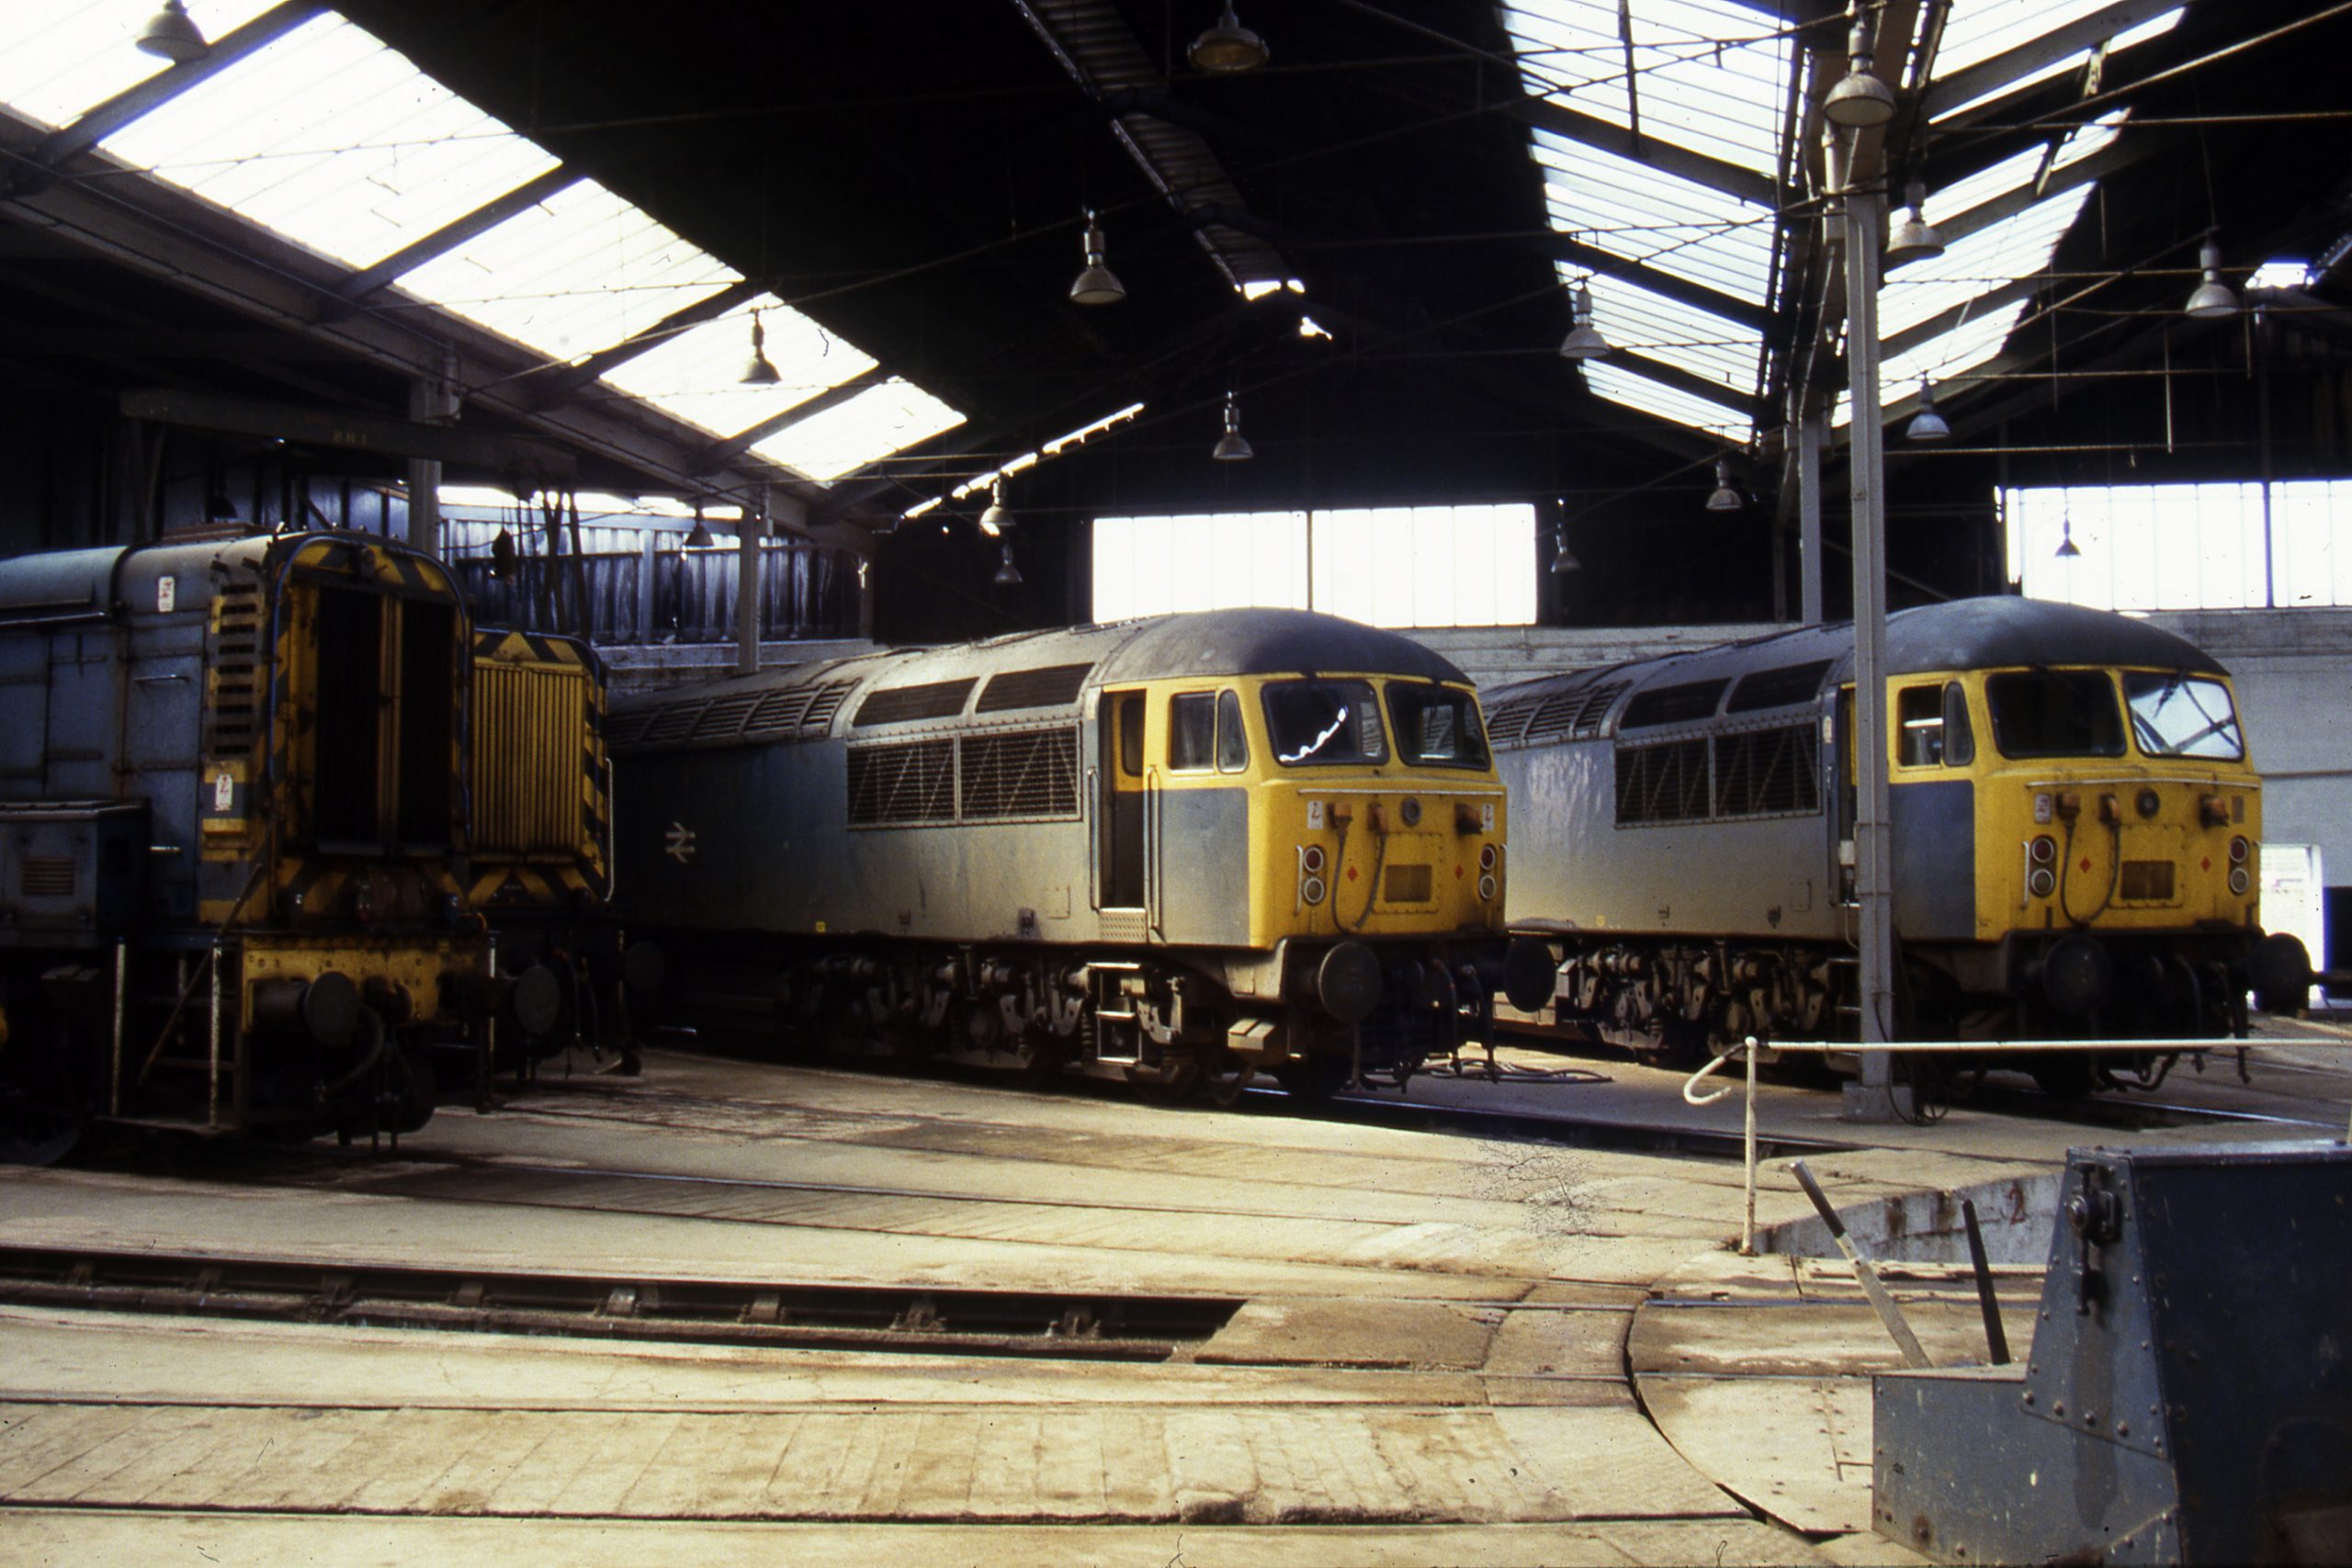 Barrow Hill 31st August 1986. The locos are 08141, 08871, 56010 and 56021. Image credit · Colour-Rail